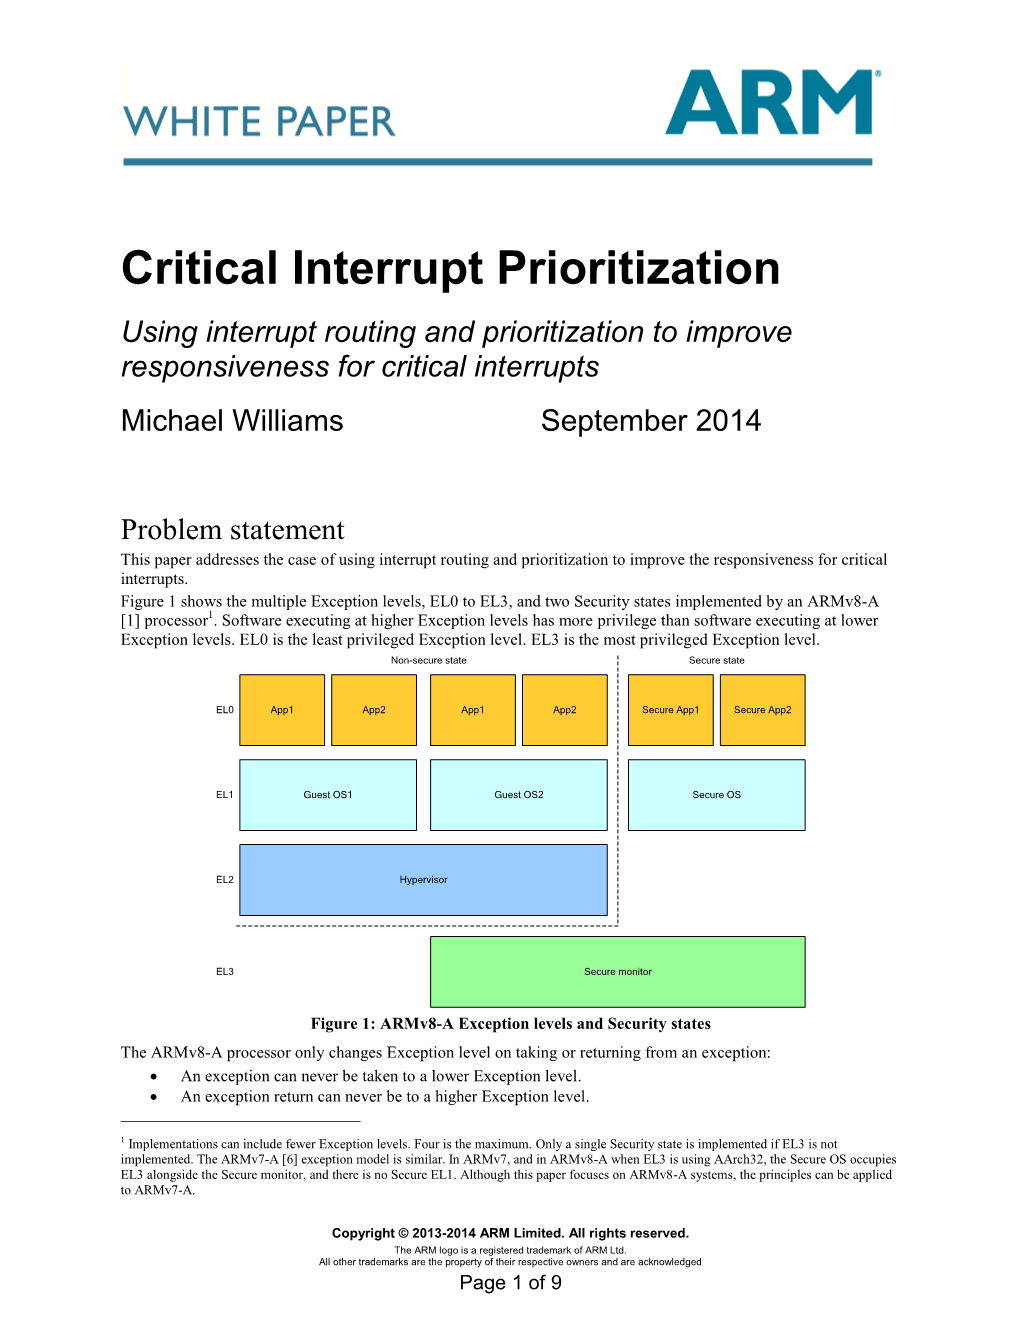 Critical Interrupt Prioritization Using Interrupt Routing and Prioritization to Improve Responsiveness for Critical Interrupts Michael Williams September 2014